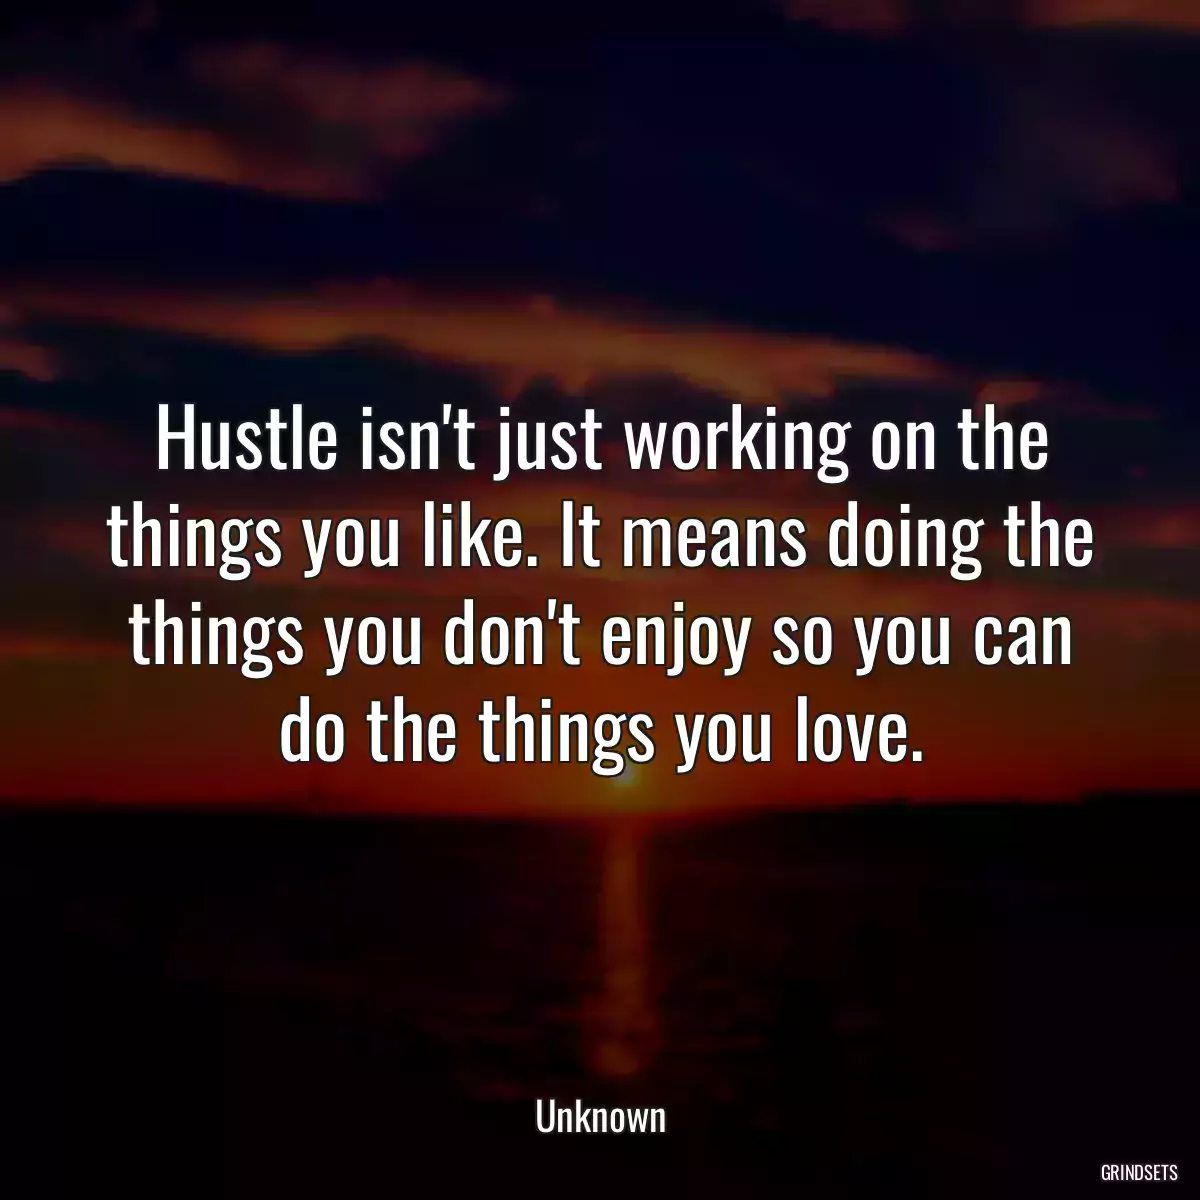 Hustle isn\'t just working on the things you like. It means doing the things you don\'t enjoy so you can do the things you love.